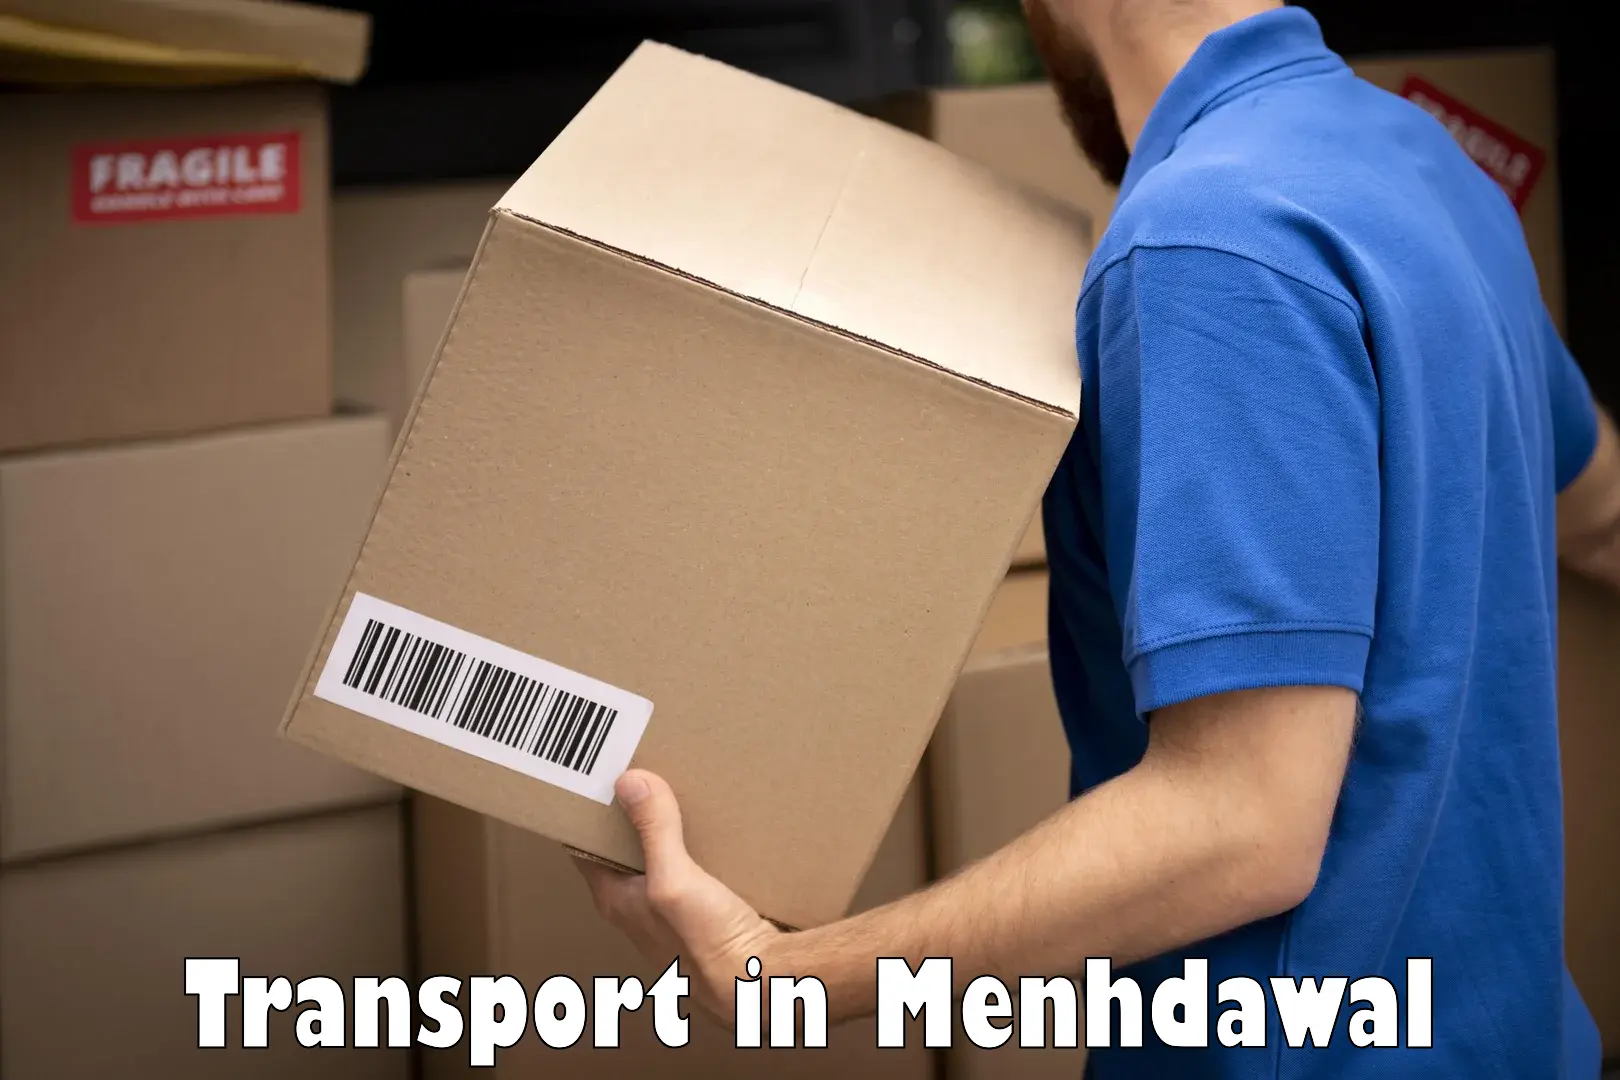 Air cargo transport services in Menhdawal